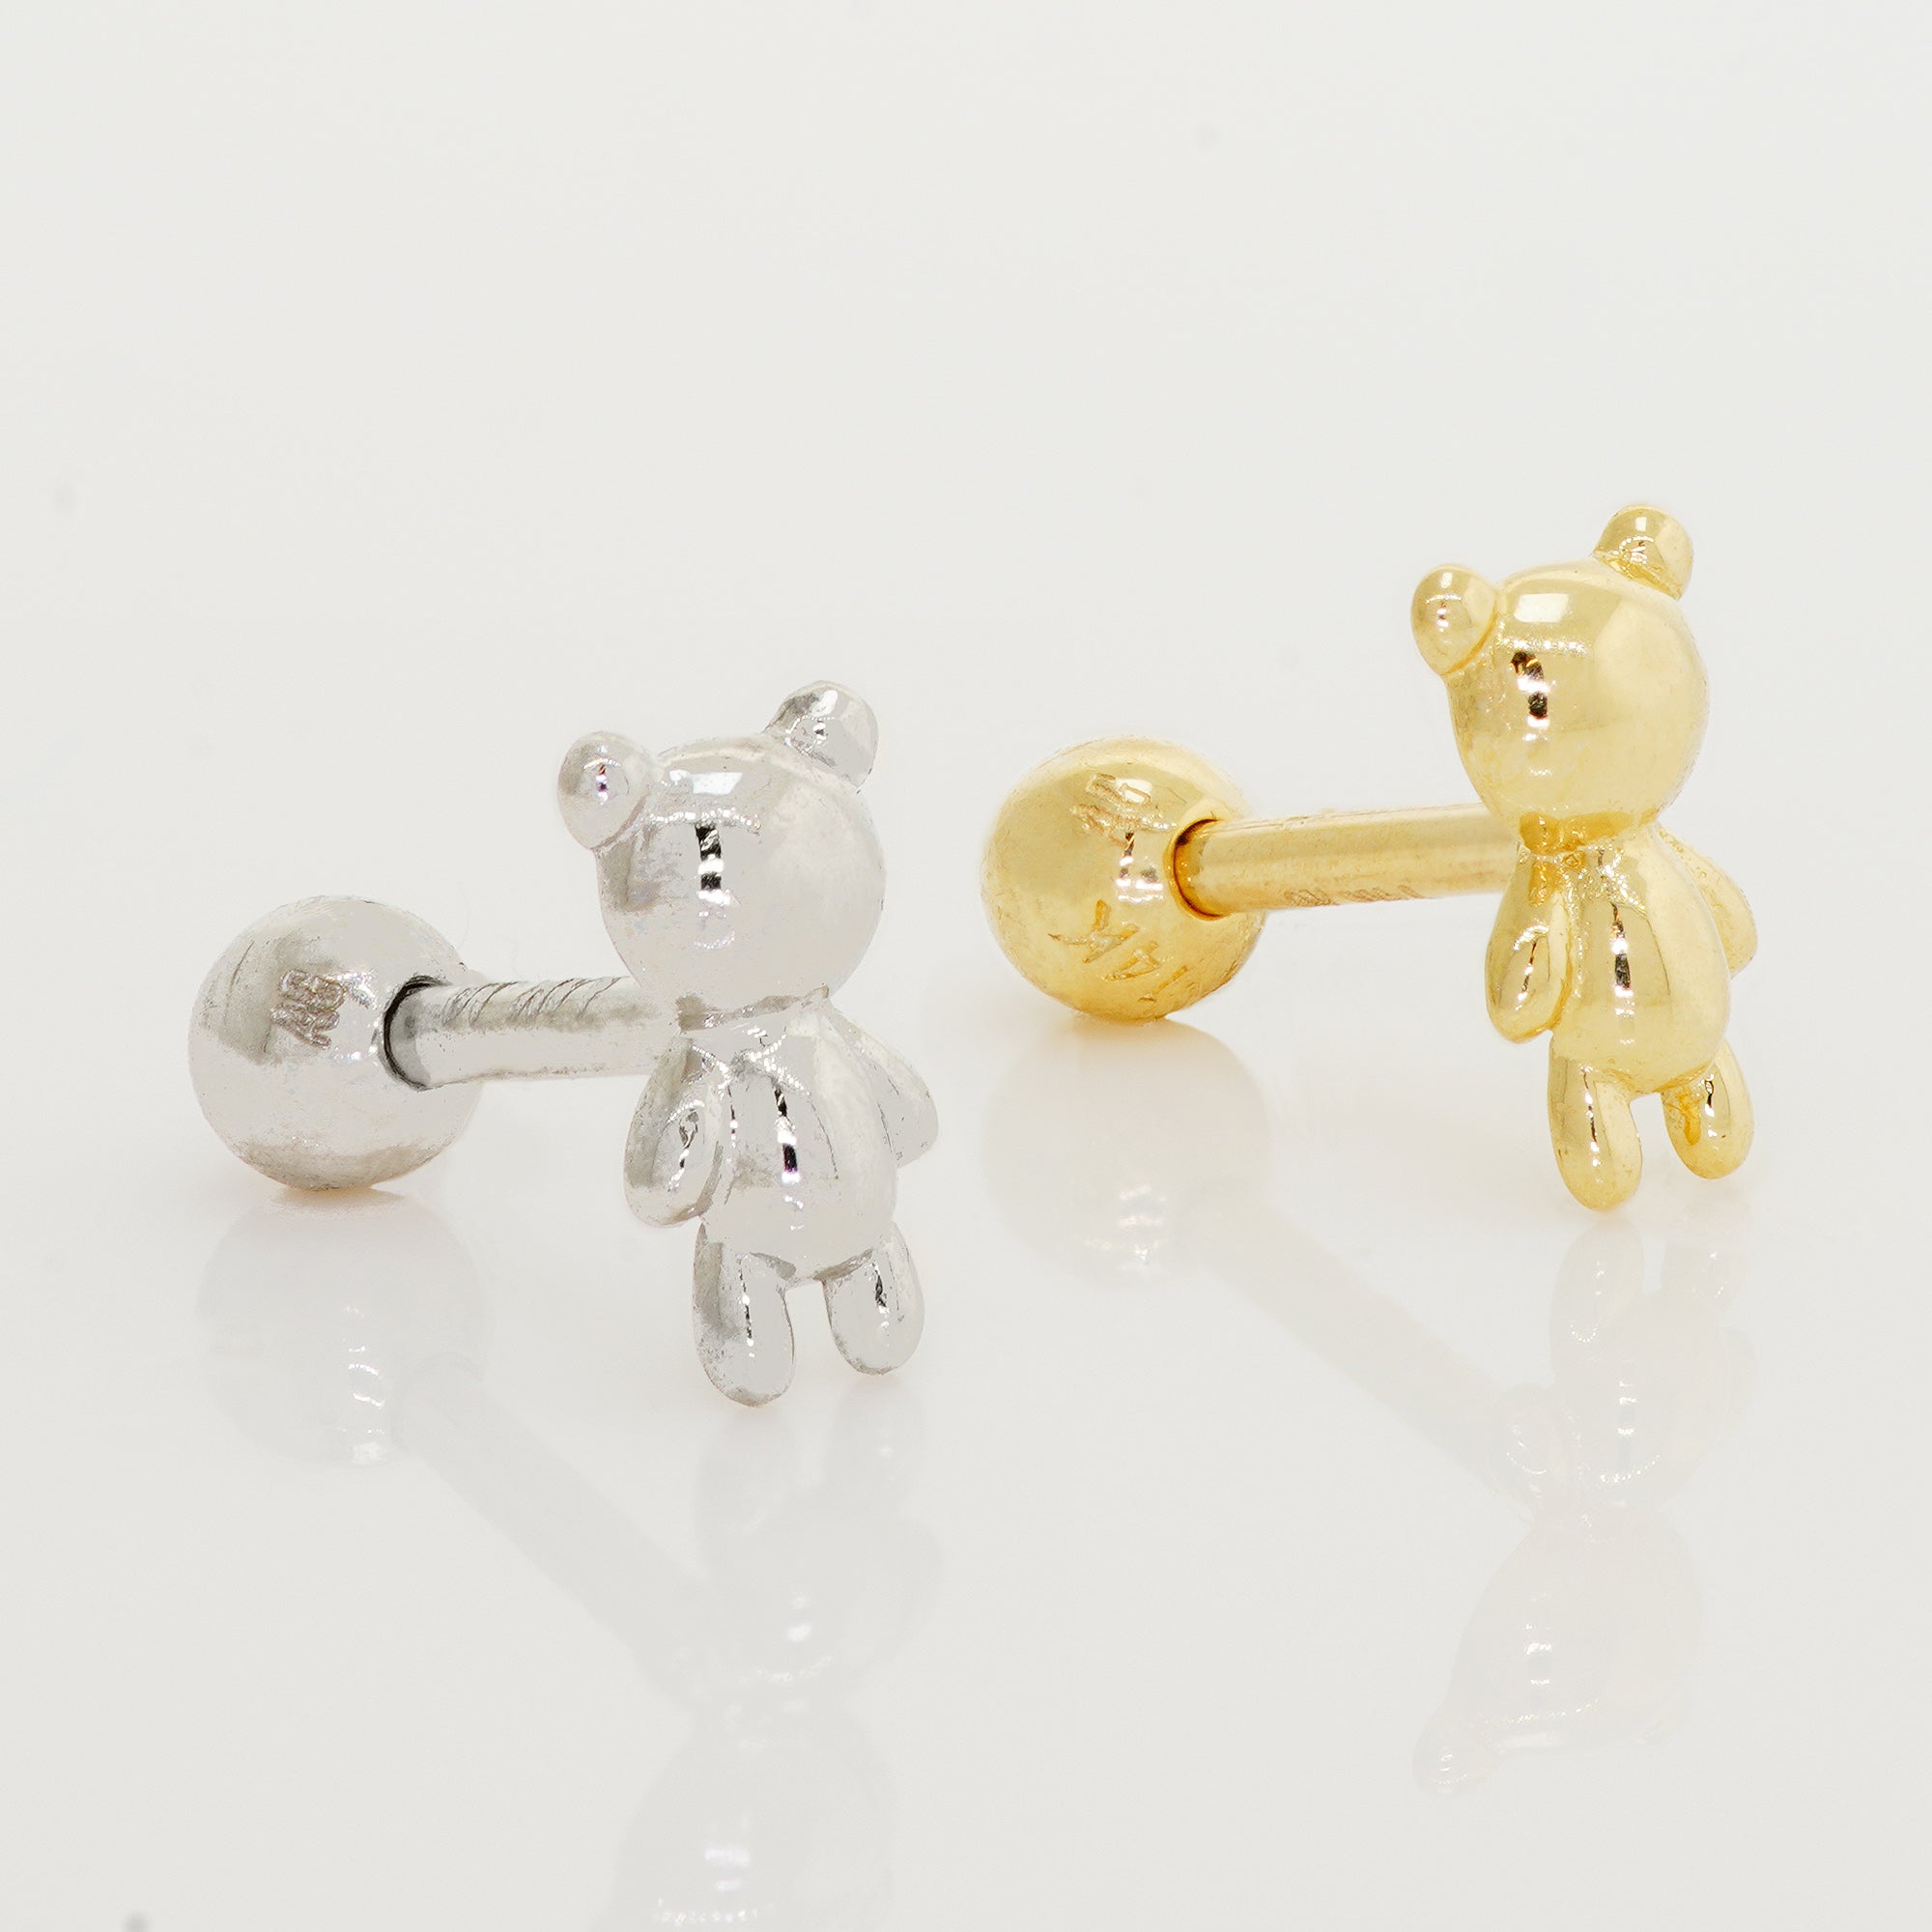 14K Solid Gold Teddy Bear Stud Piercing Earring - Anygolds 